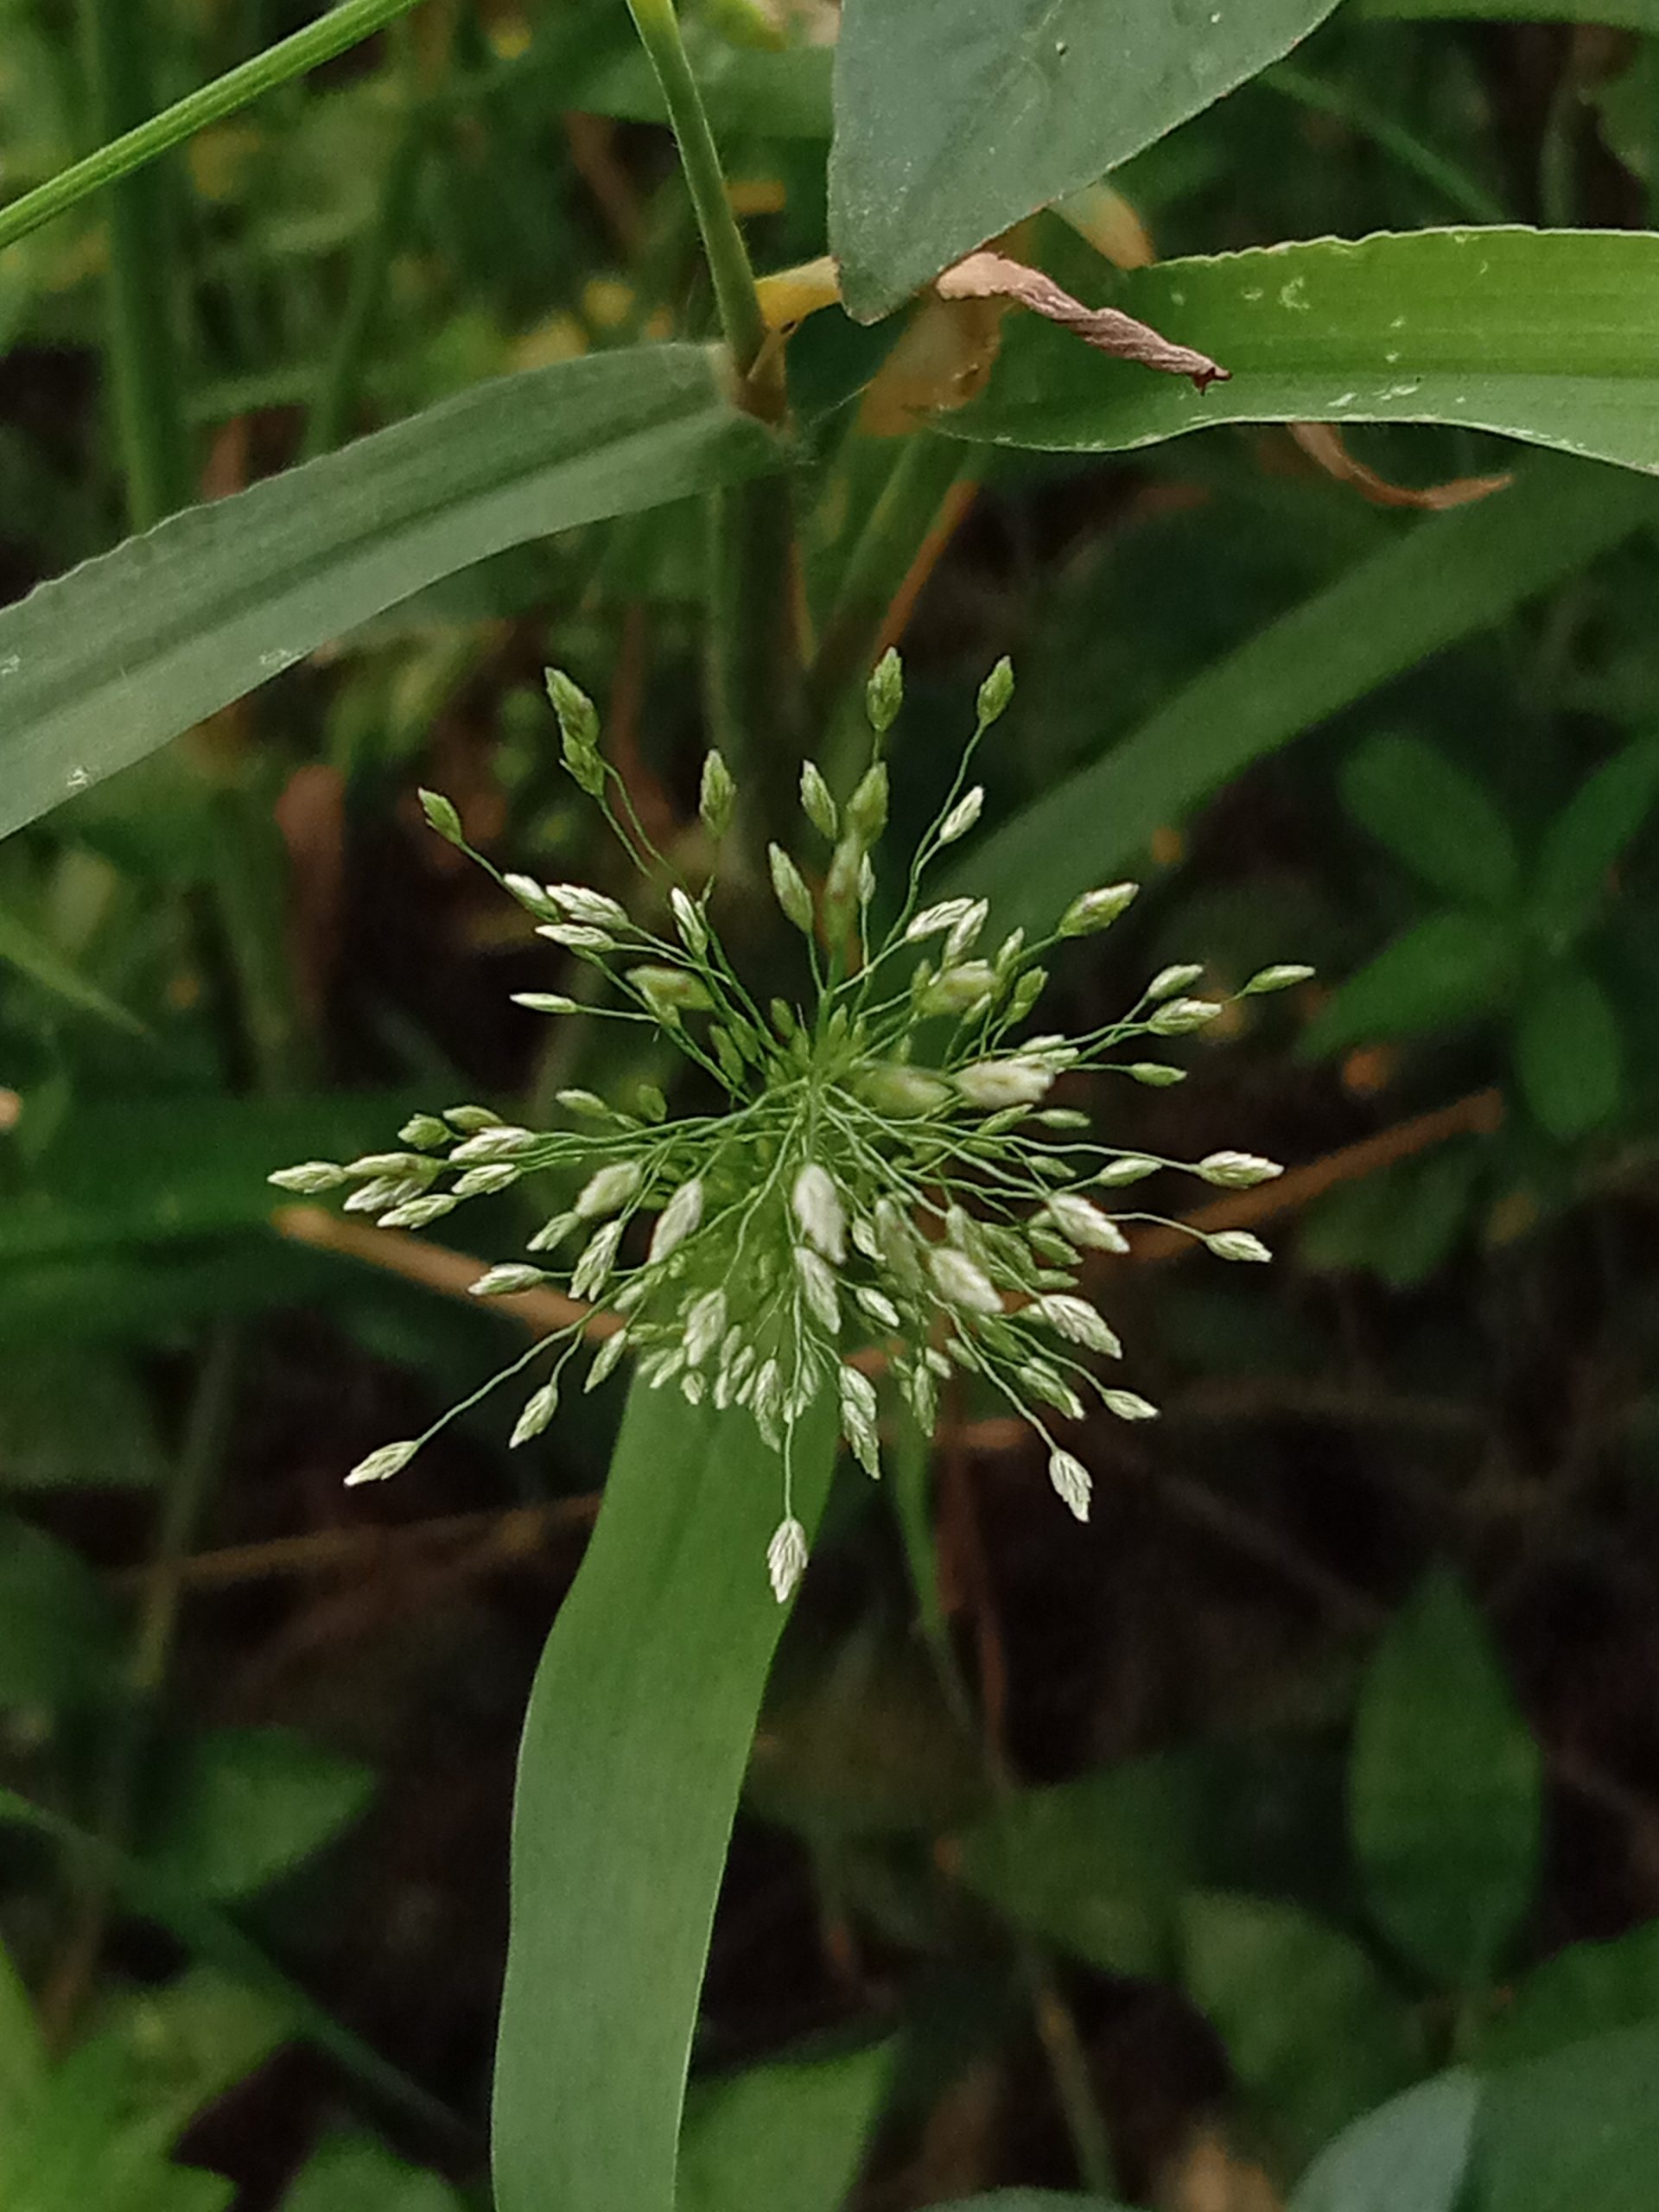 Flowers of a grass plant